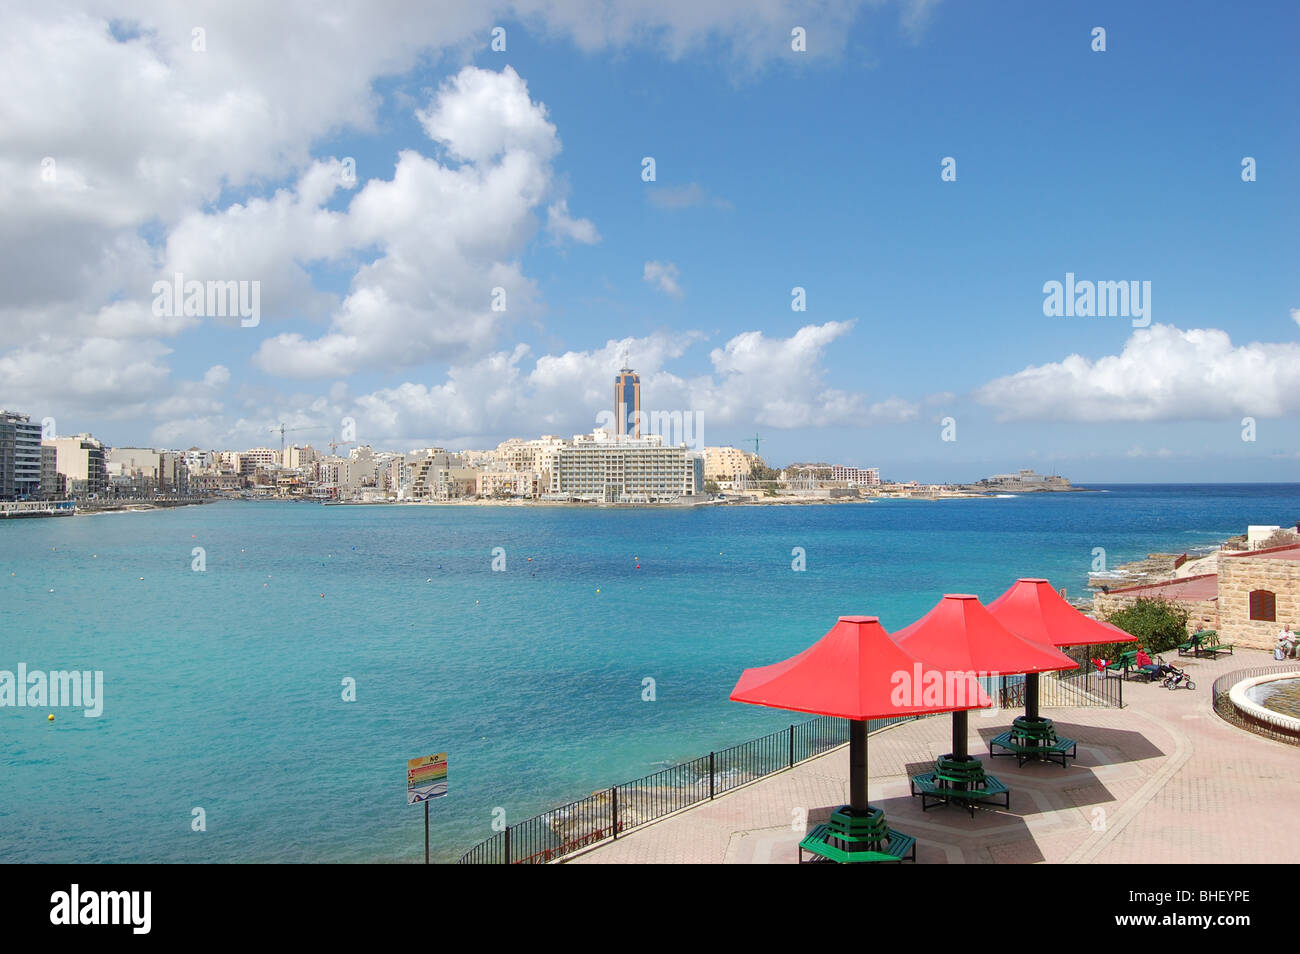 A view across Balluta and St. Julians bay. Stock Photo